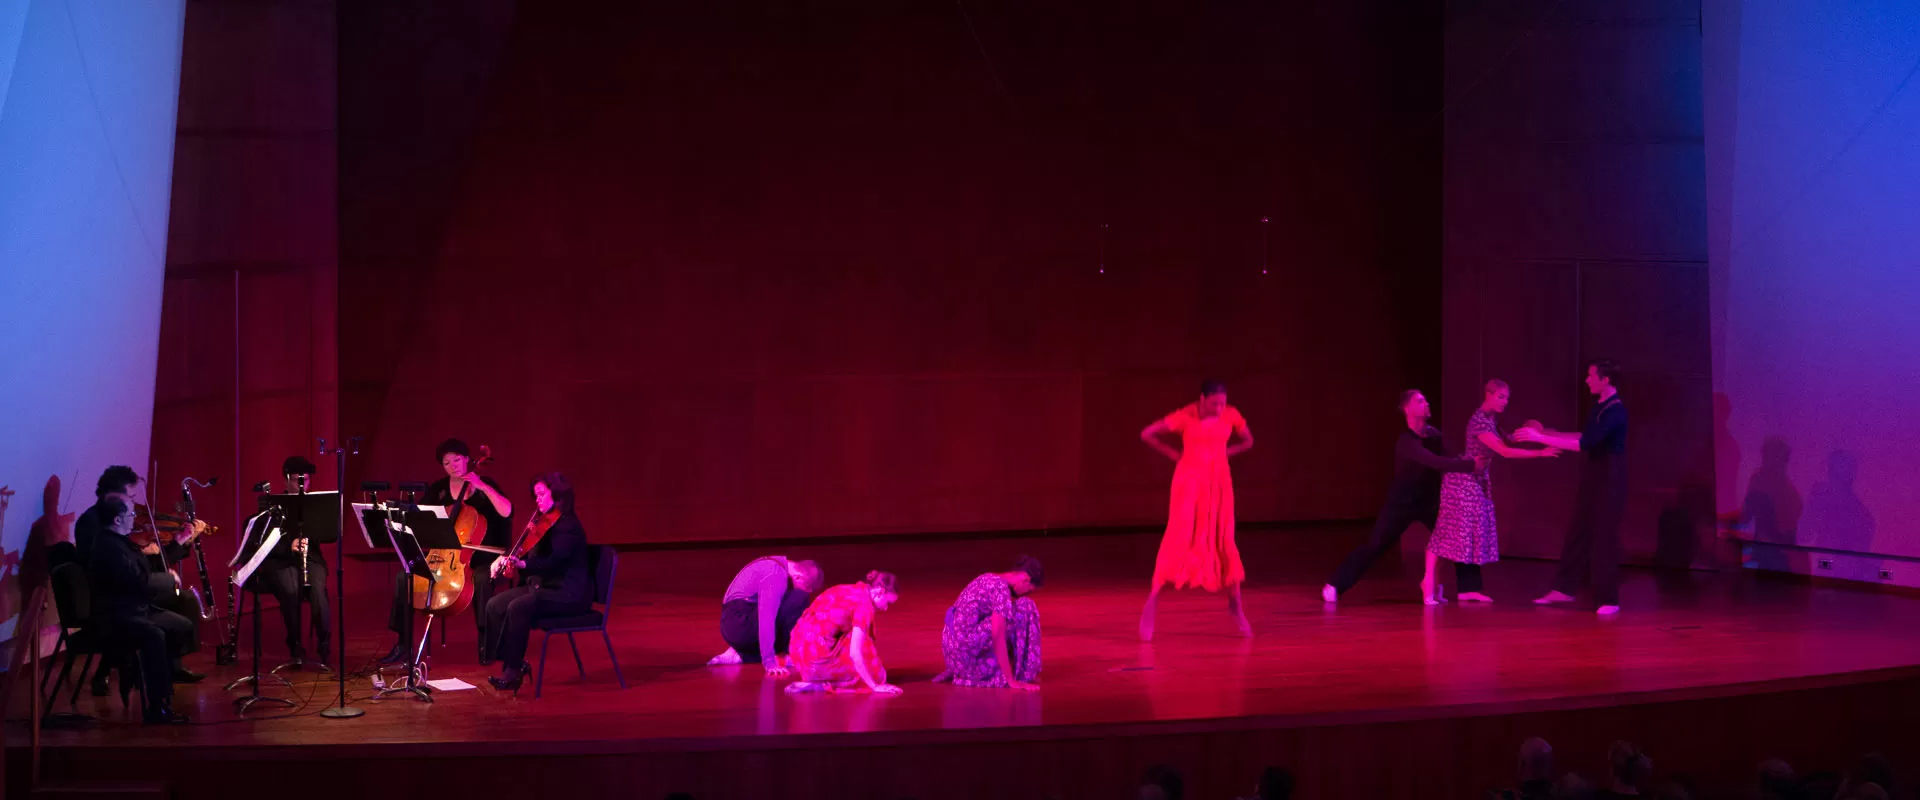 Destination Unknown (2013), choreography for Zeks Yiddishe Lider un Tantz from The Golem by Betty Olivero